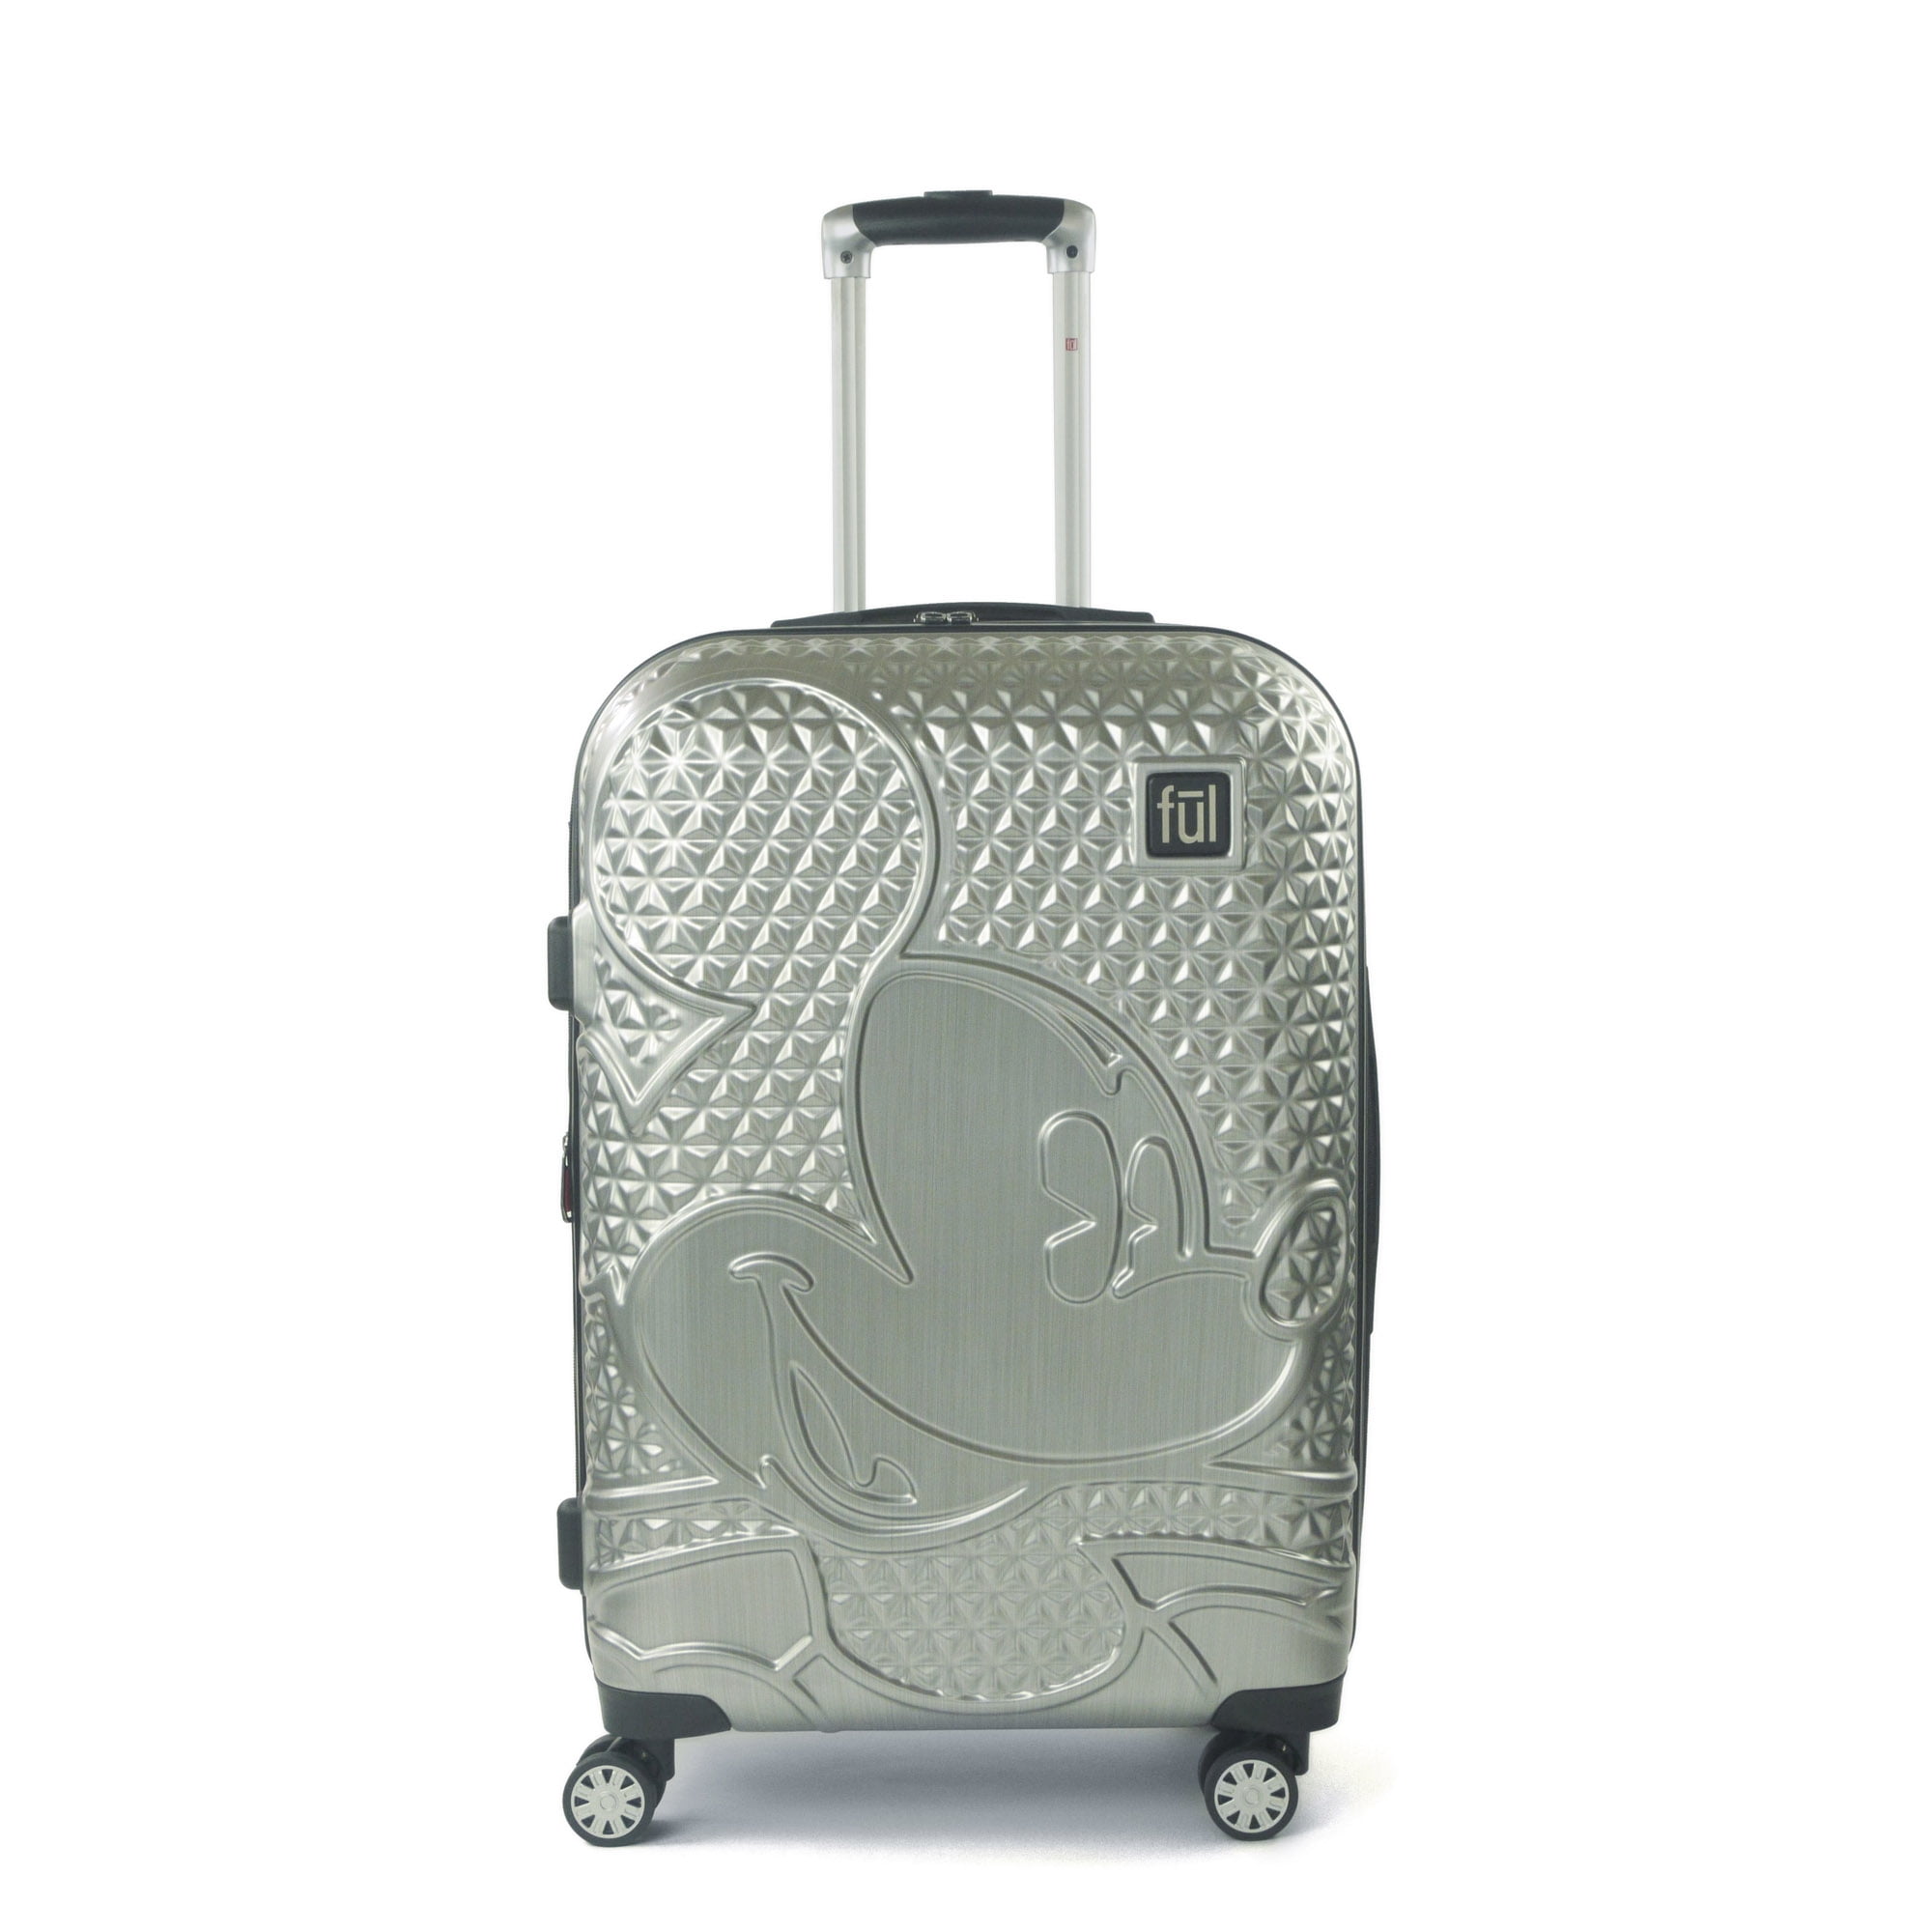 FUL Disney Textured Mickey Mouse 25in Hard Sided Rolling Luggage, Silver